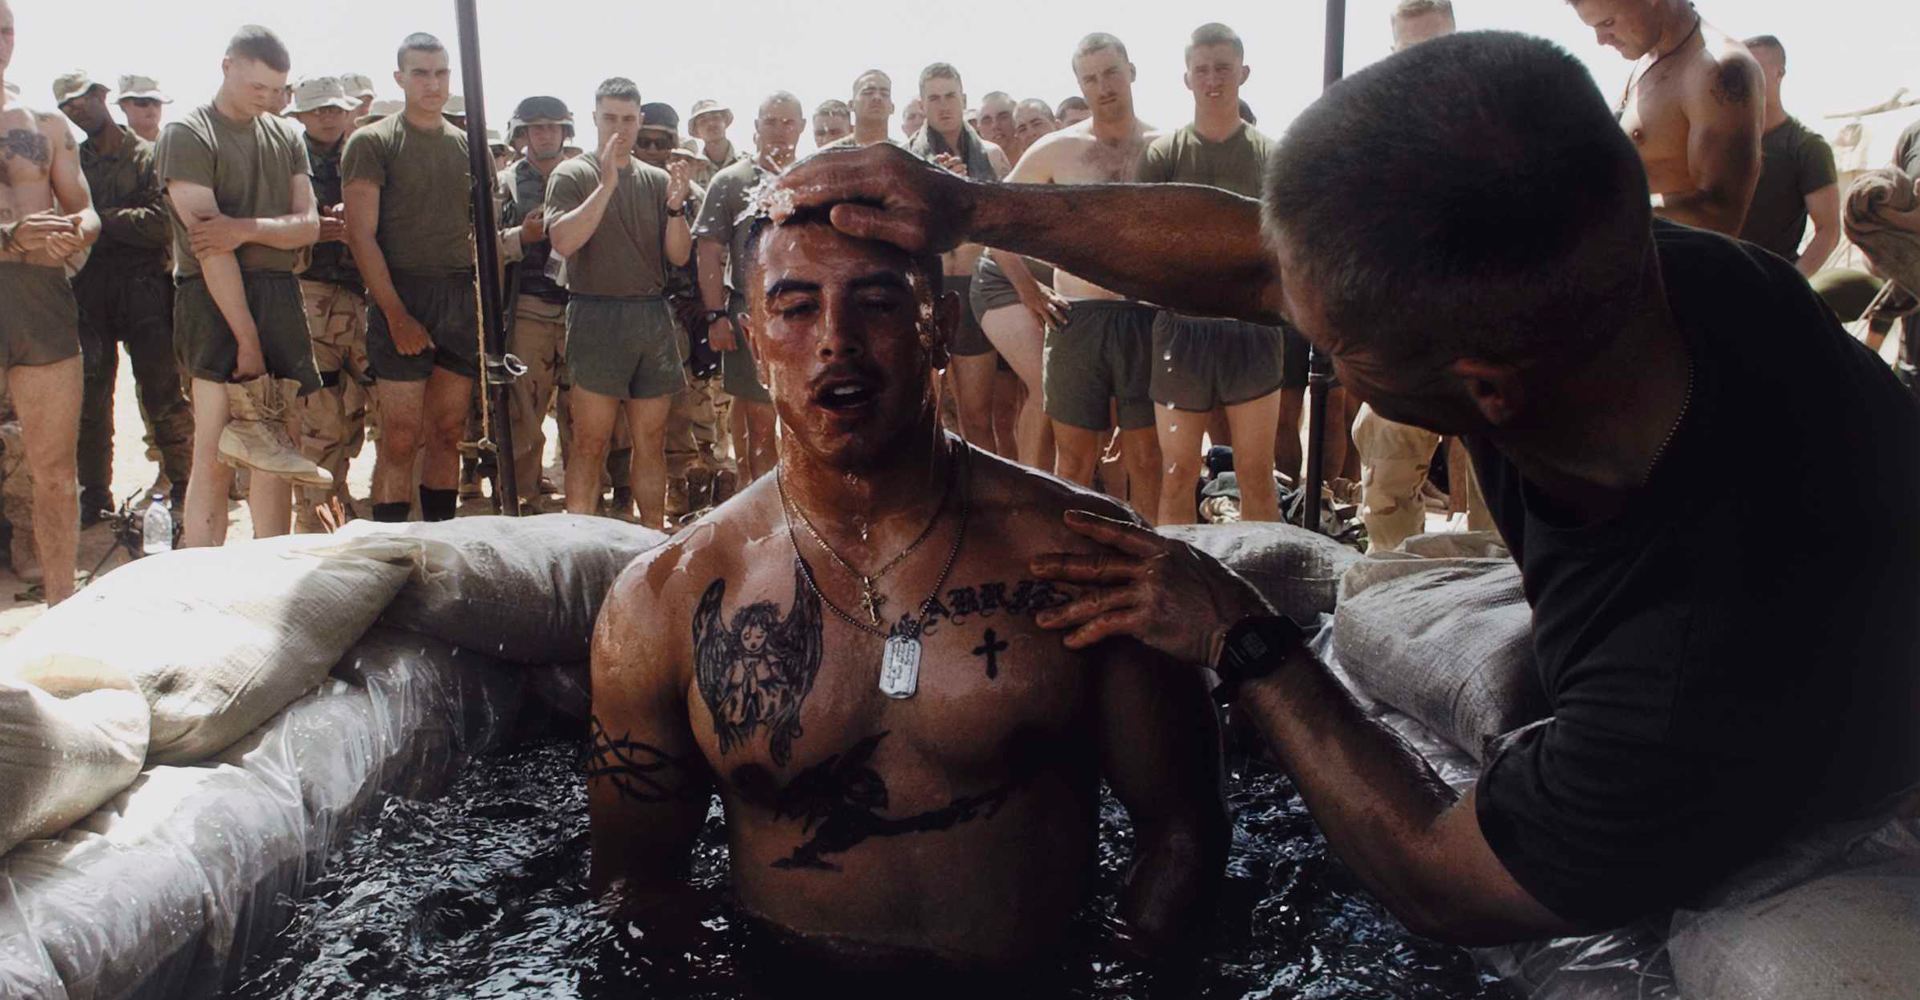 Navy Chaplain Lt. Commander Tom Webber baptizes Corporal Albert Martinez in a sandbag-lined pool during a ceremony at Camp Inchon, Kuwait - March 2003